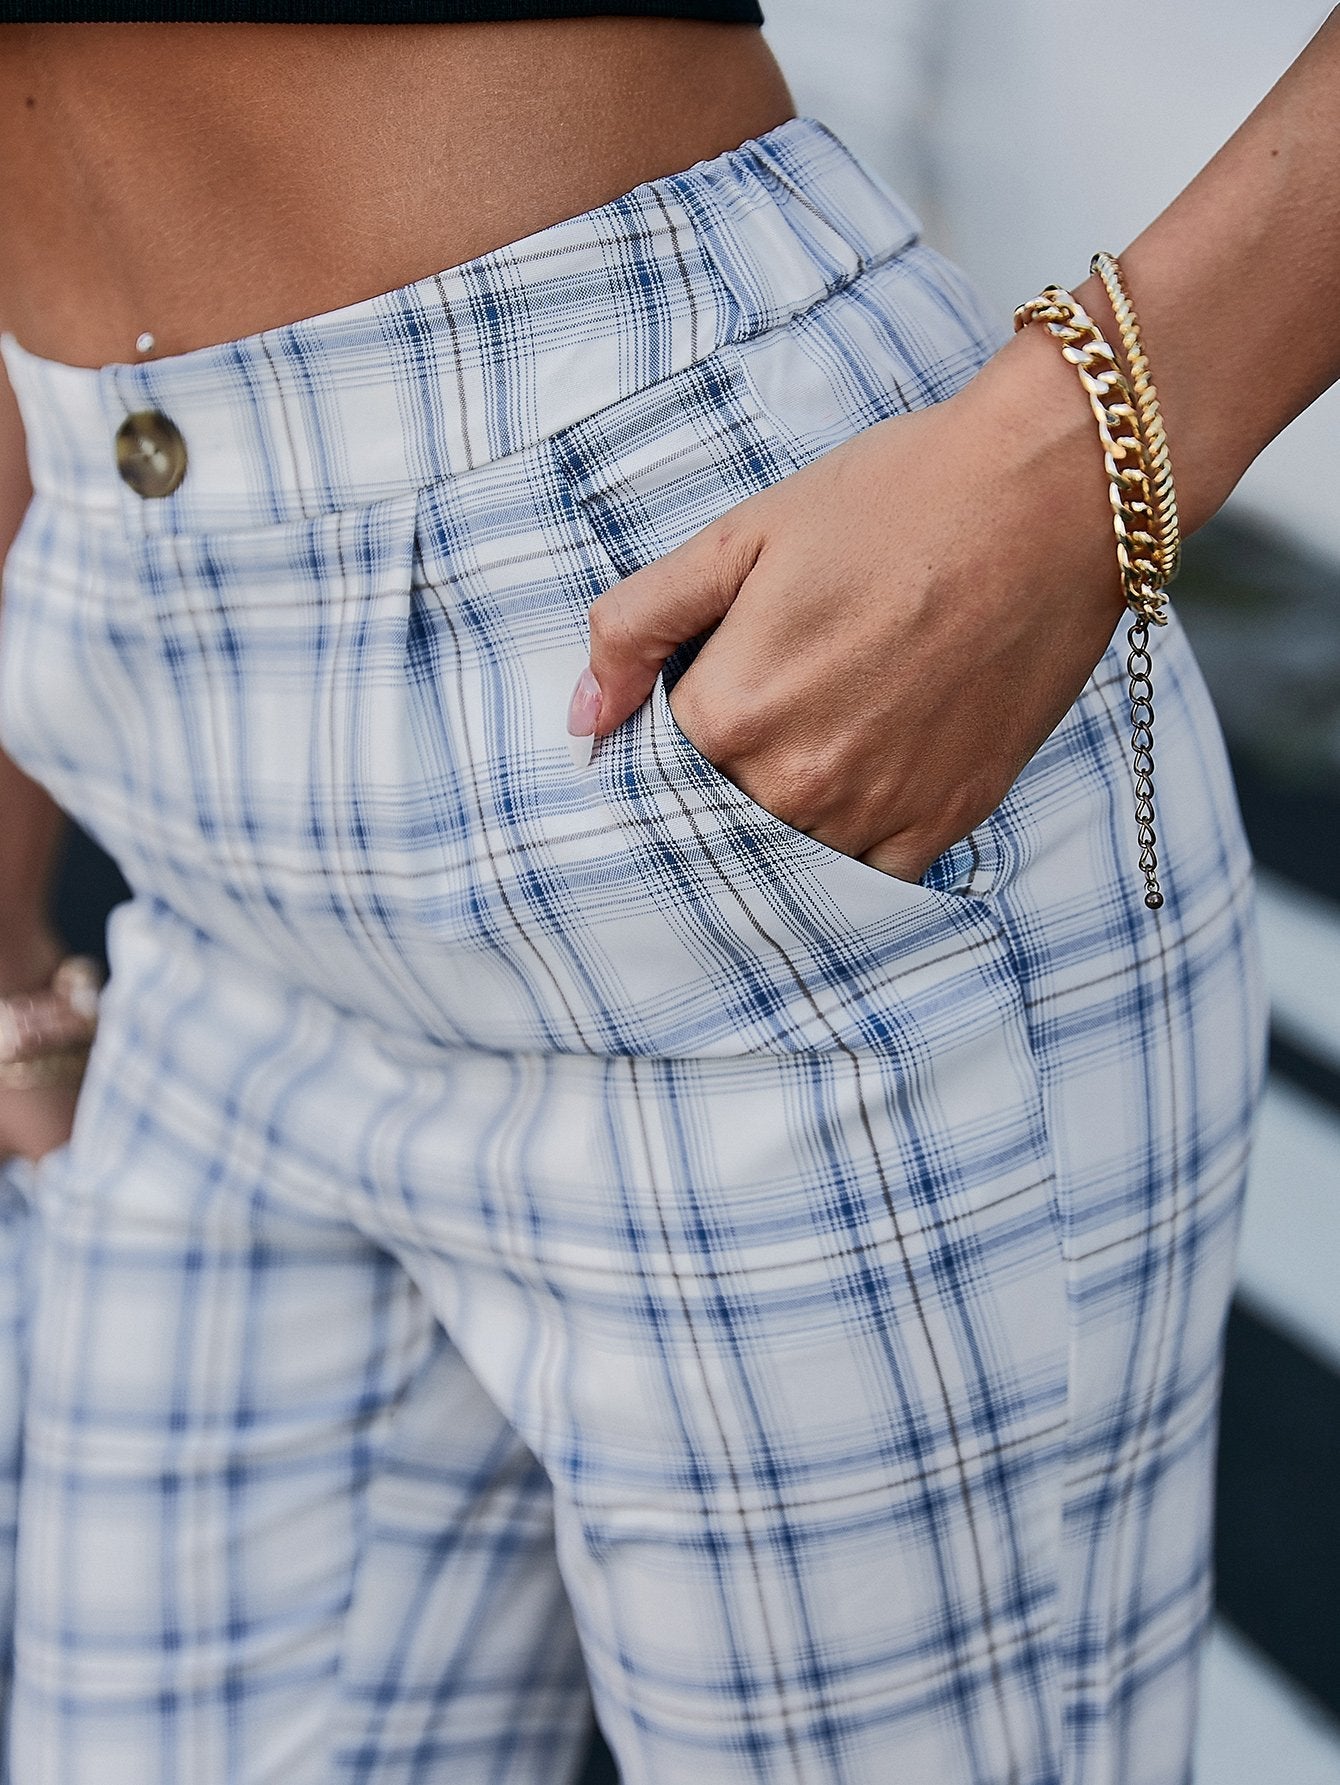 Plaid Cropped Pants with Side Pockets BLUE ZONE PLANET